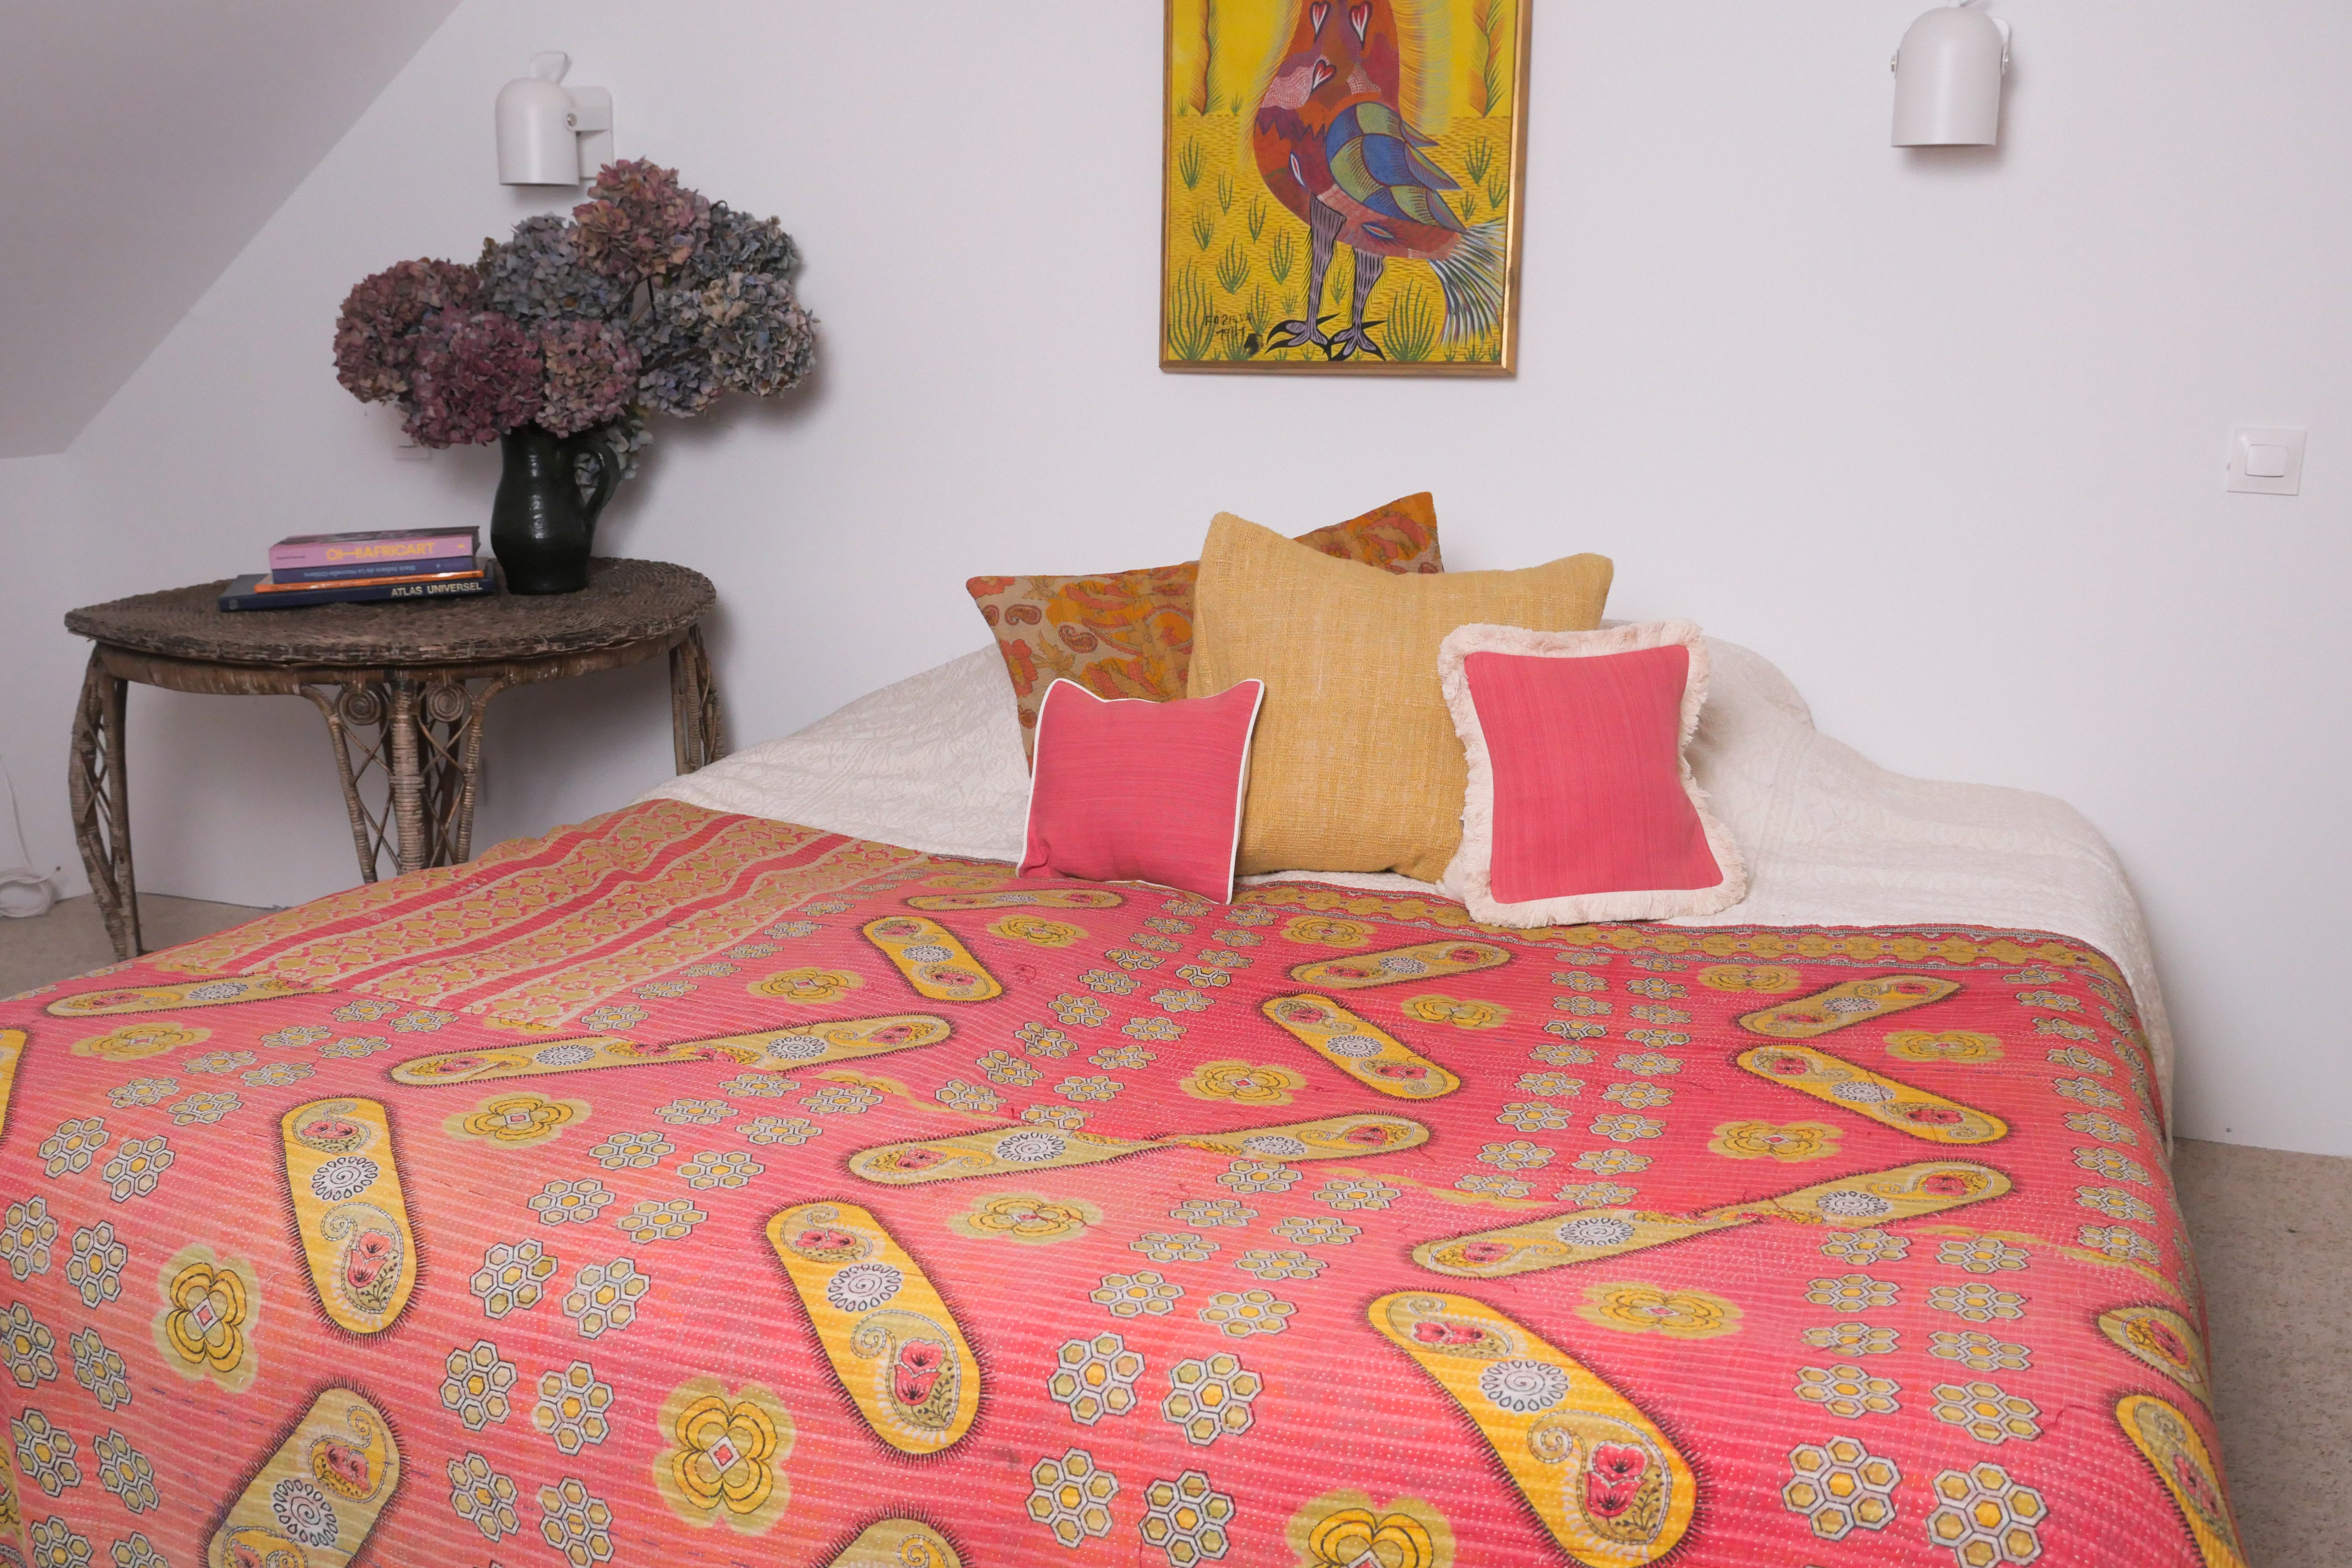 Kantha bedspread made with recycled saris